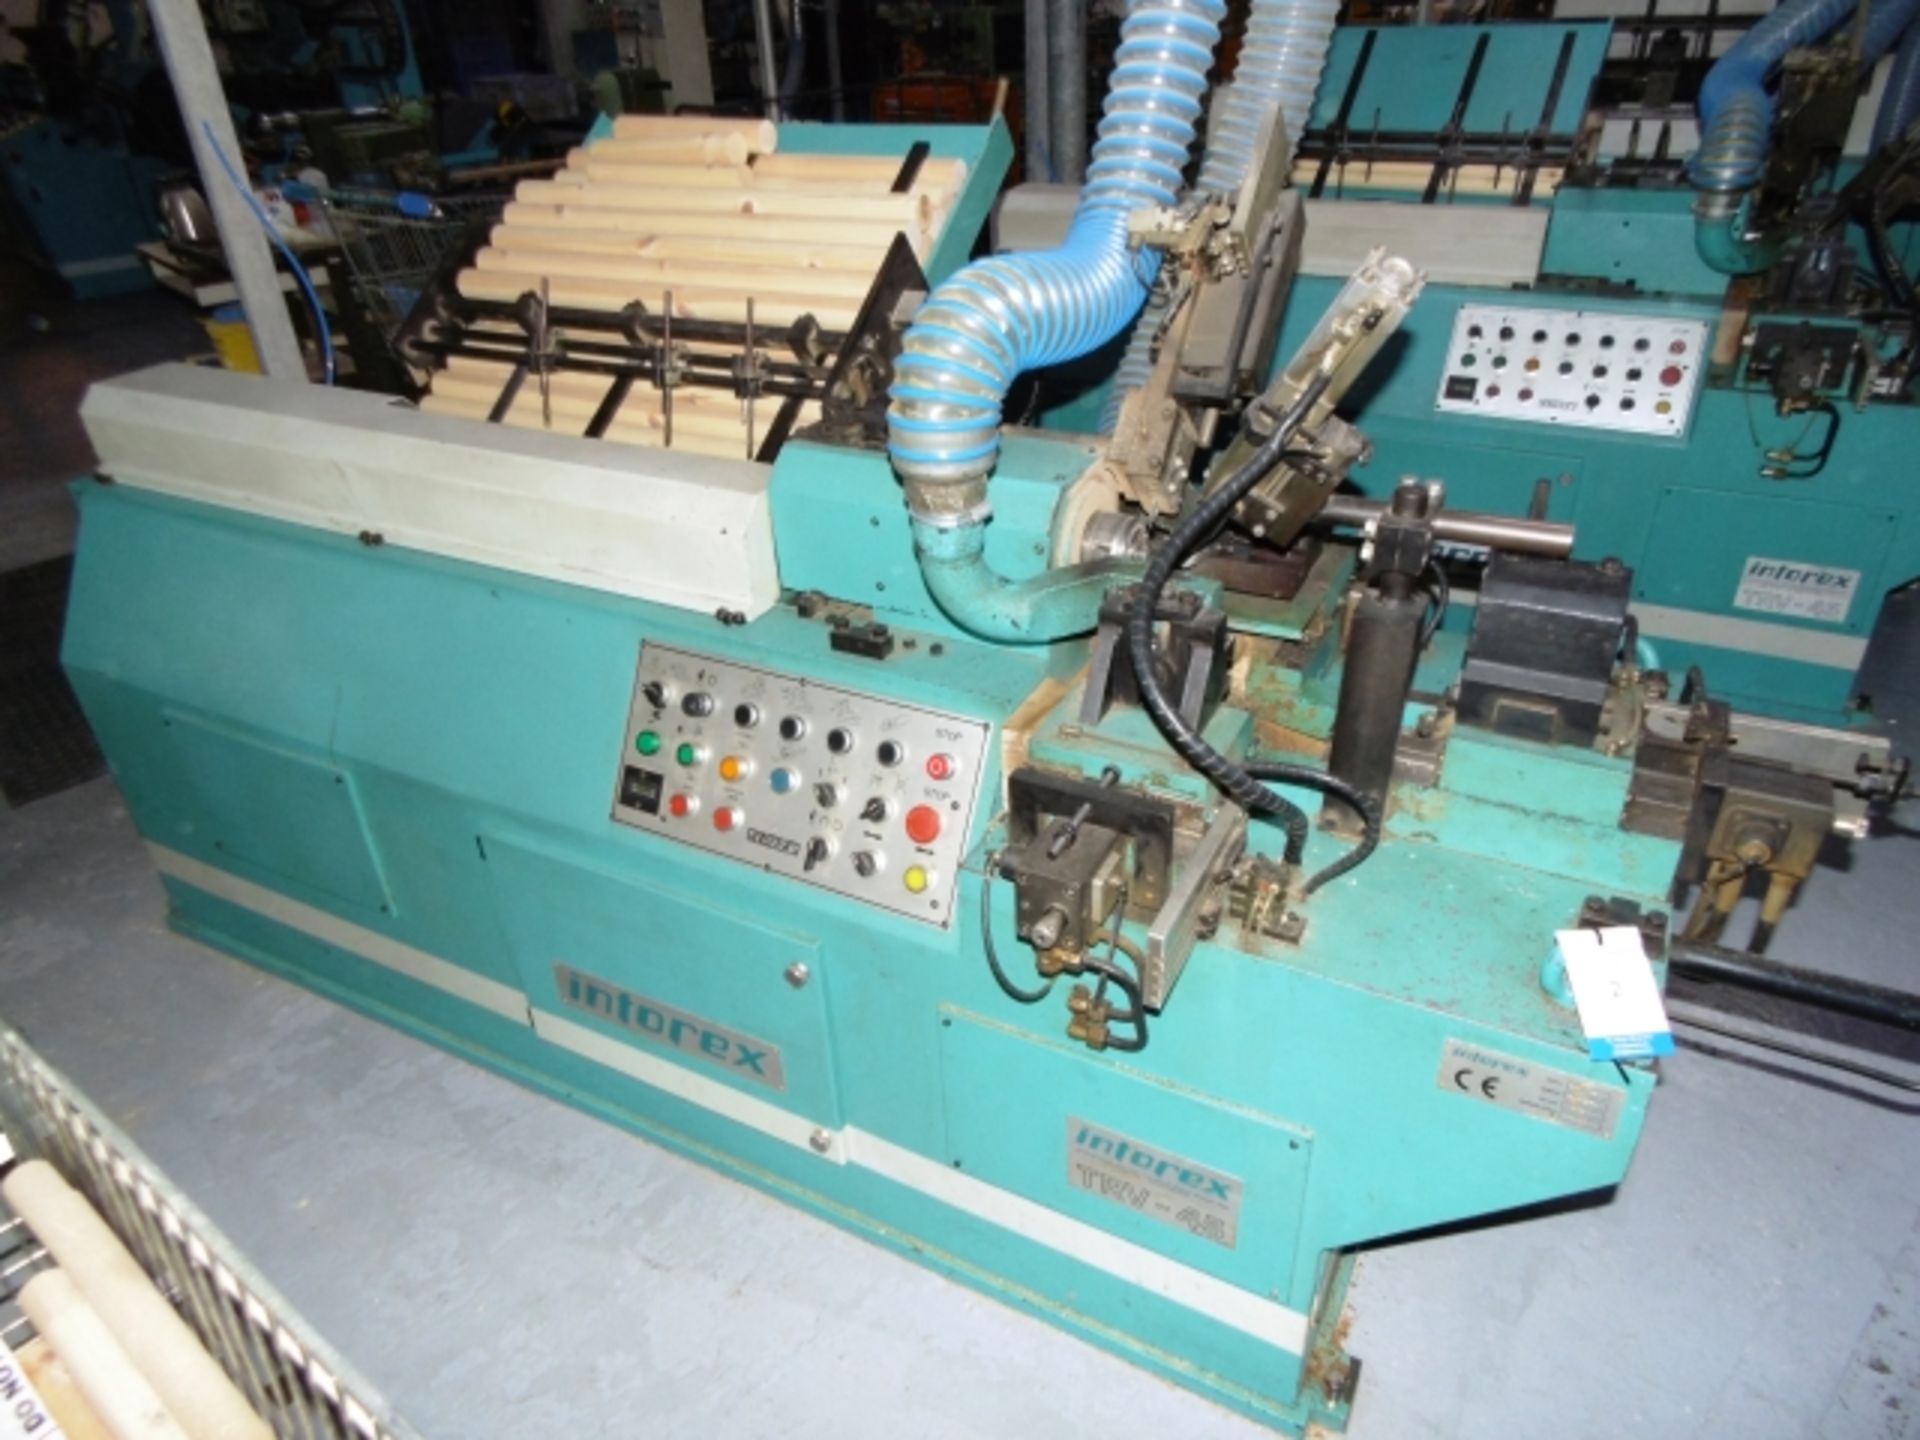 * 1997 Intorex TRV-45 Automatic Wood Turning Lathe. Serial No 201278. 2 knives, frontal tool and a